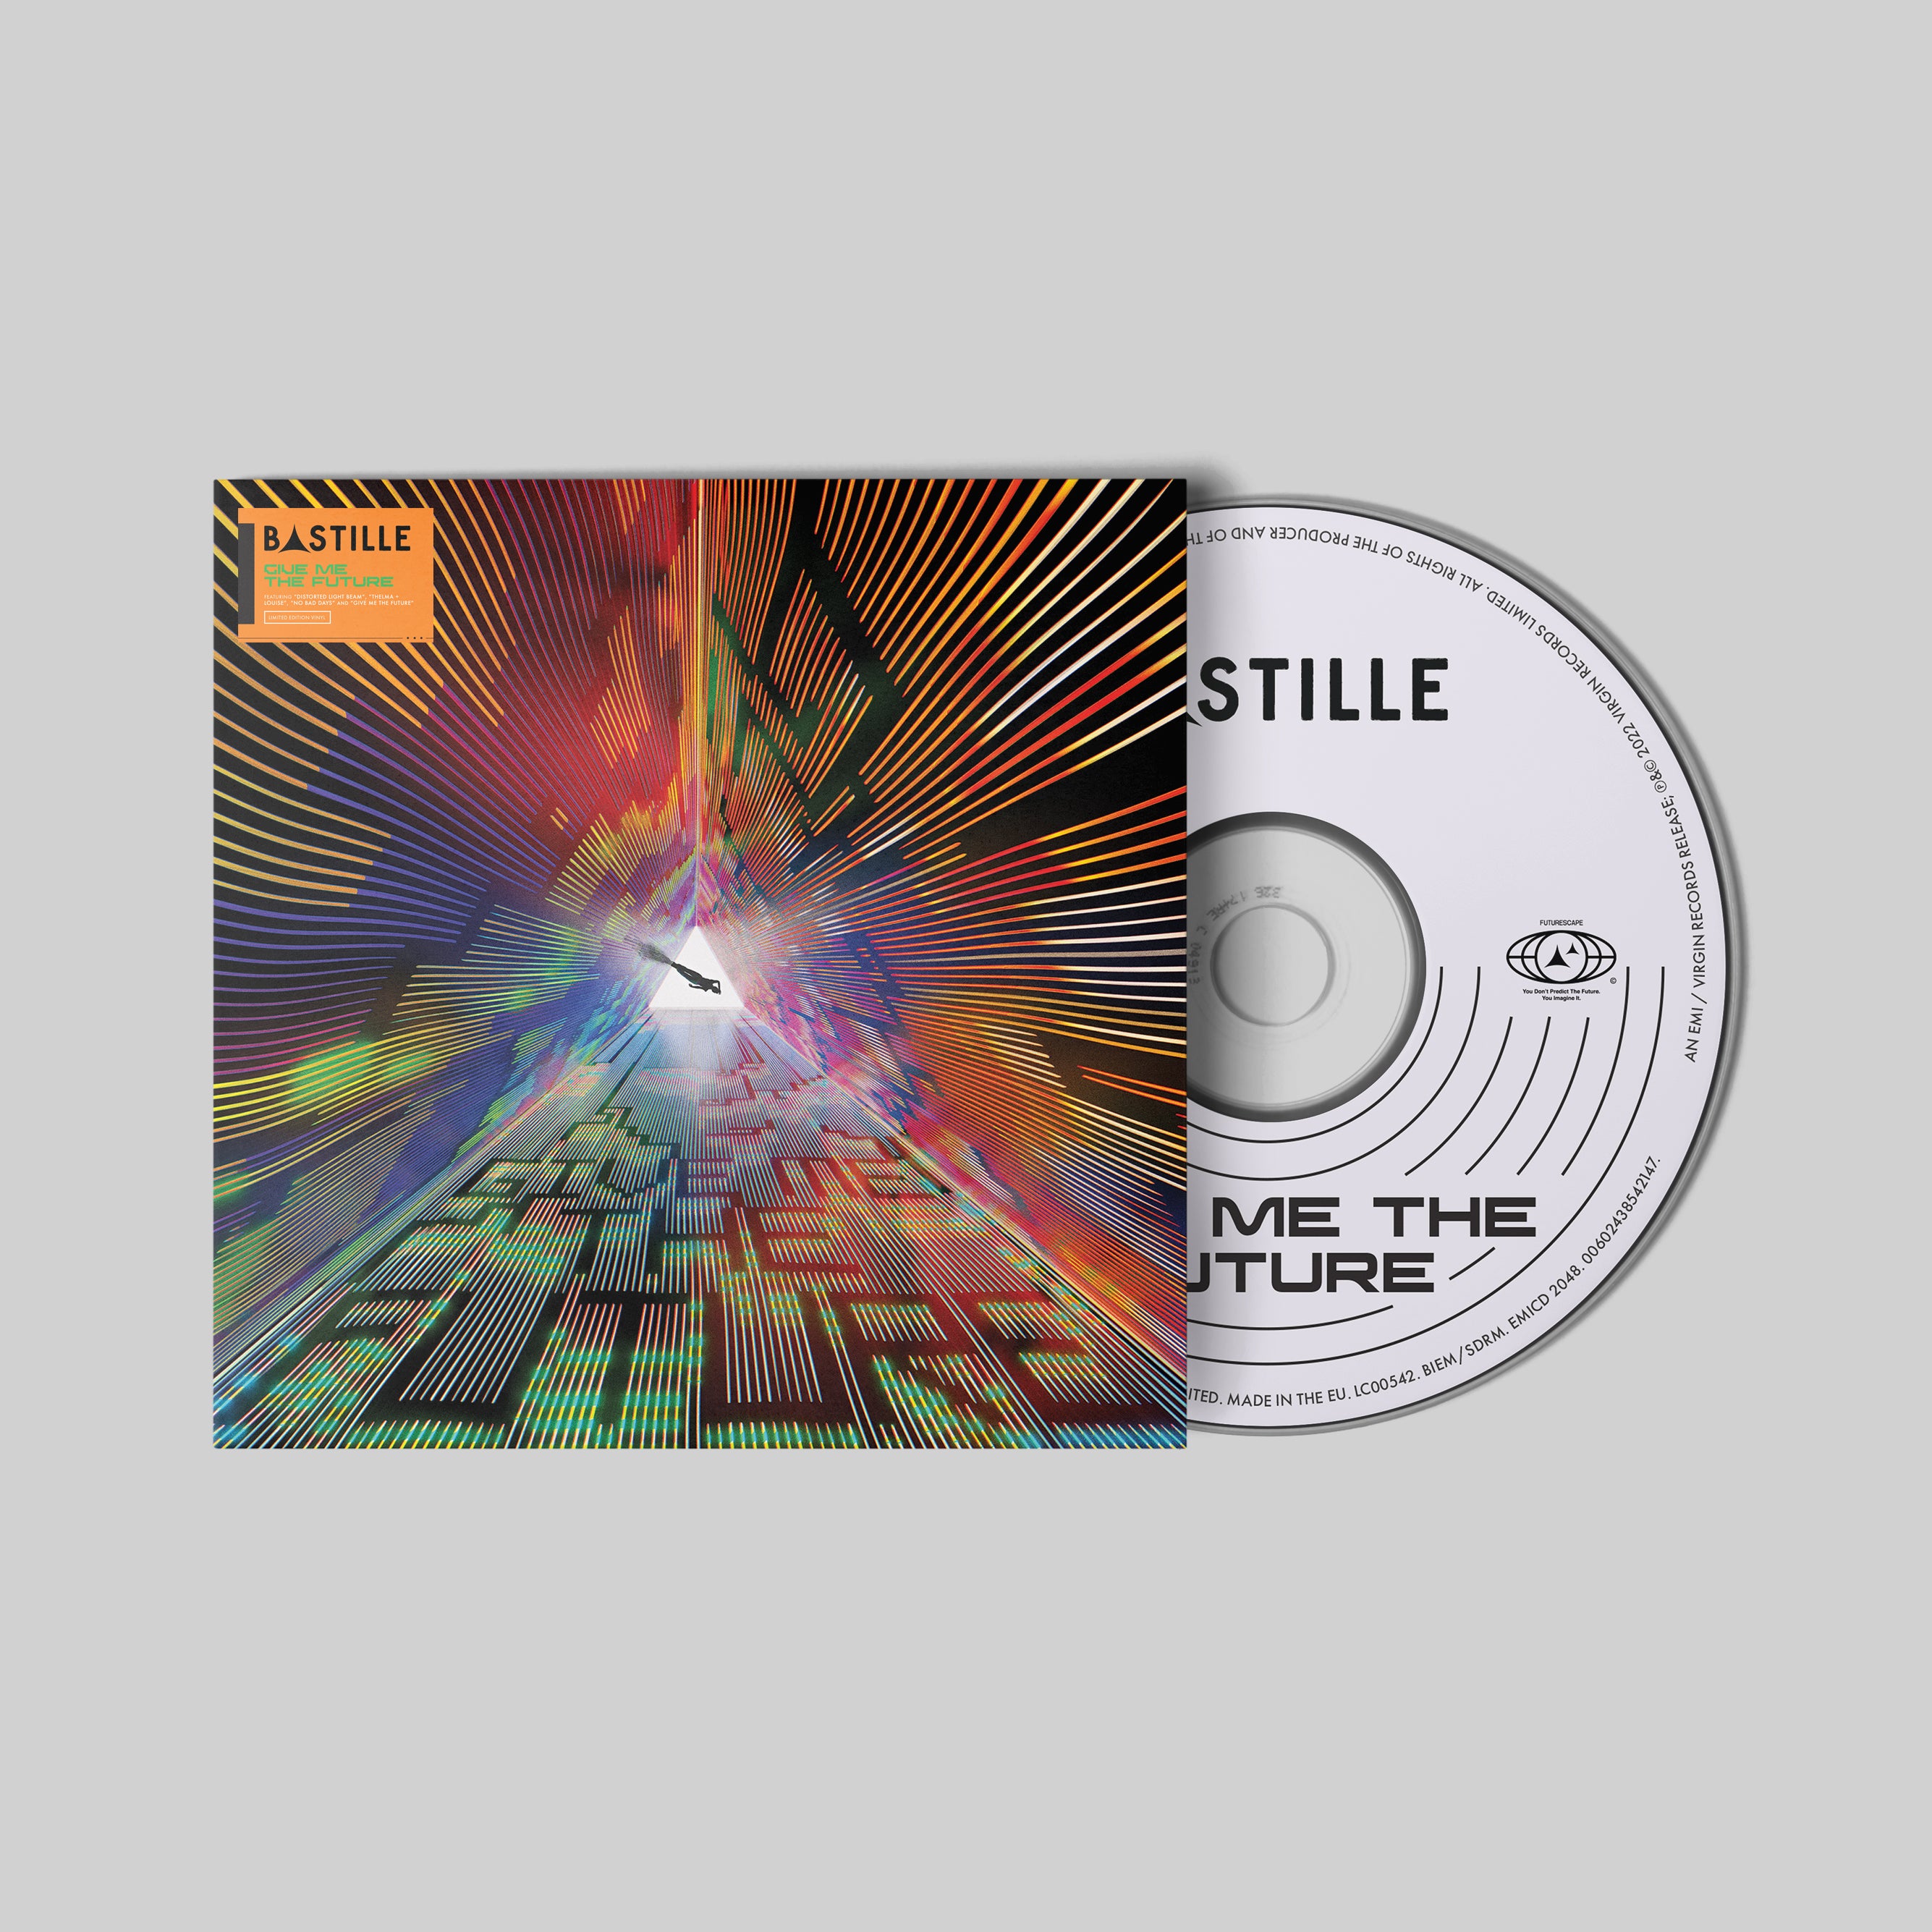 Bastille - Give Me The Future: CD